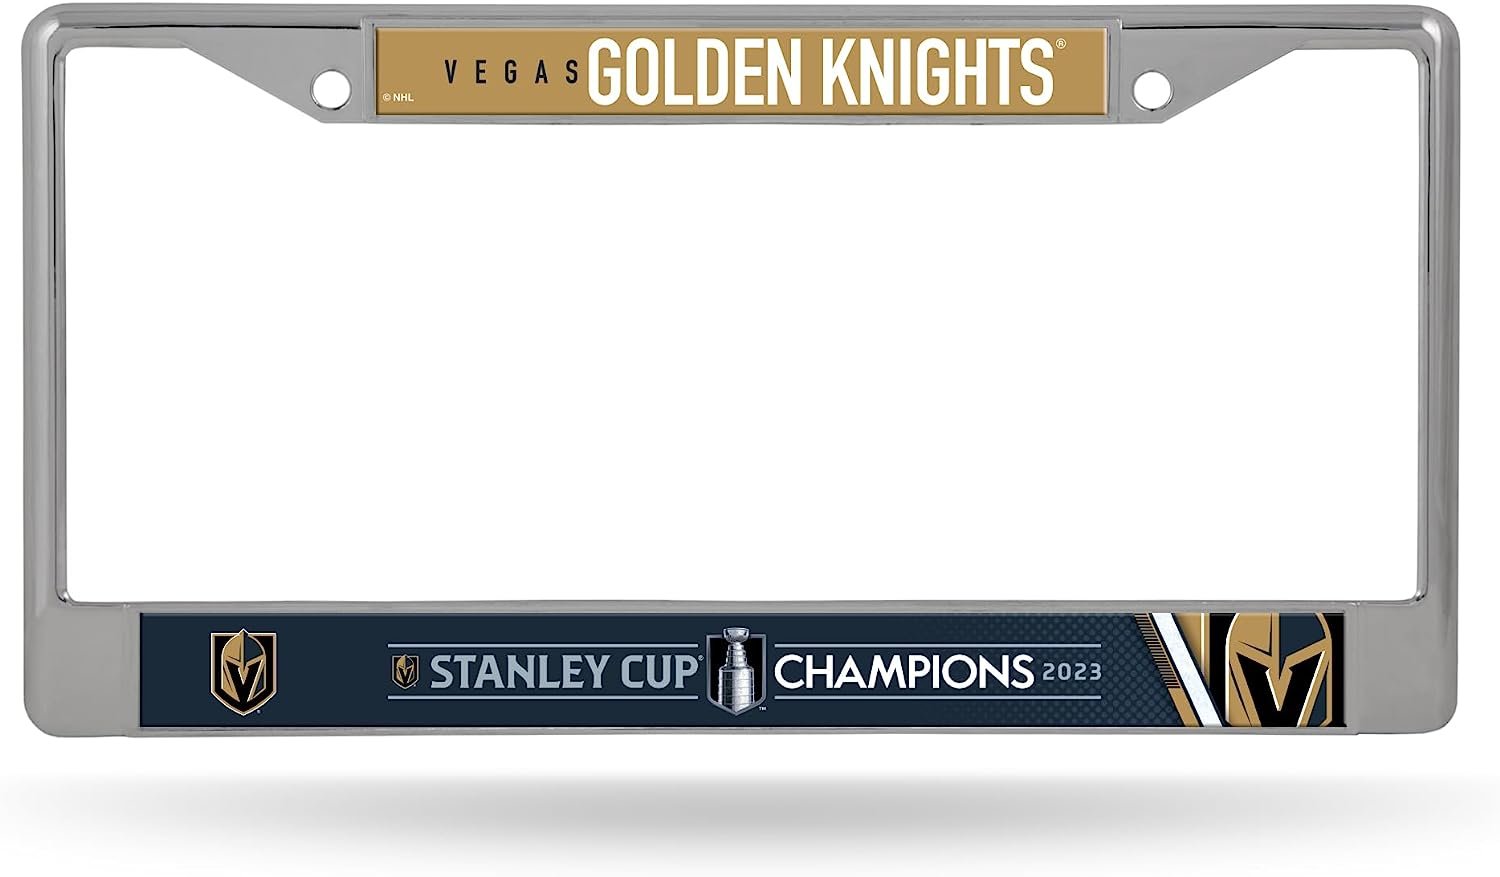 Vegas Golden Knights 2023 Stanley Cup Champions Chrome Metal License Plate Frame Tag Cover, 6x12 Inch